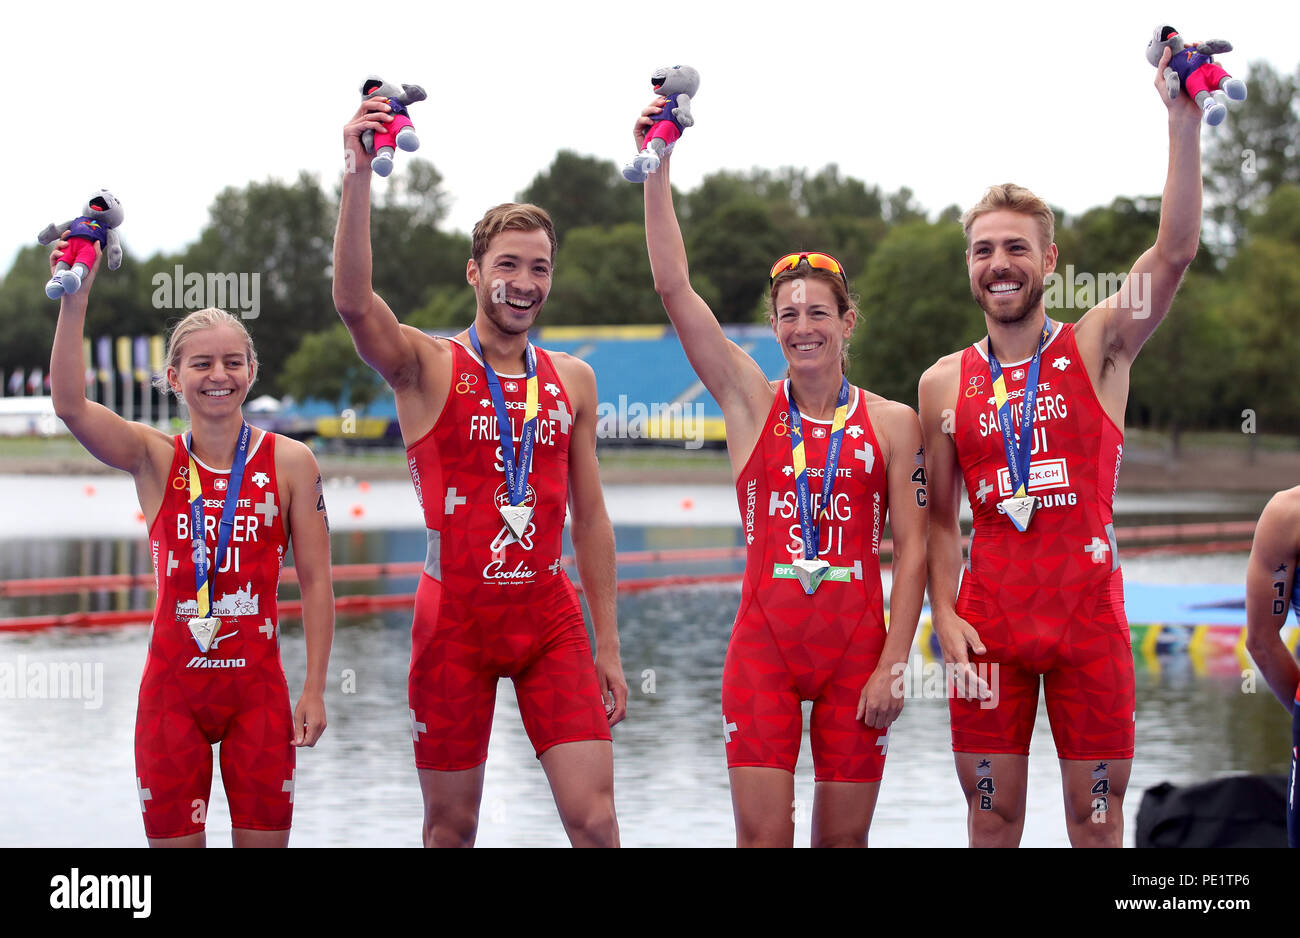 Silver medal winners Switzerland's Lisa Berger, Andrea Salvisberg, Nicola Spirig and Sylvain Fridelance for the Triathlon Mixed team relay during day ten of the 2018 European Championships at Strathclyde Country Park, Lanarkshire. PRESS ASSOCIATION Photo. Picture date: Saturday August 11, 2018. See PA story TRIATHLON European. Photo credit should read: John Walton/PA Wire. RESTRICTIONS: Editorial use only, no commercial use without prior permission Stock Photo